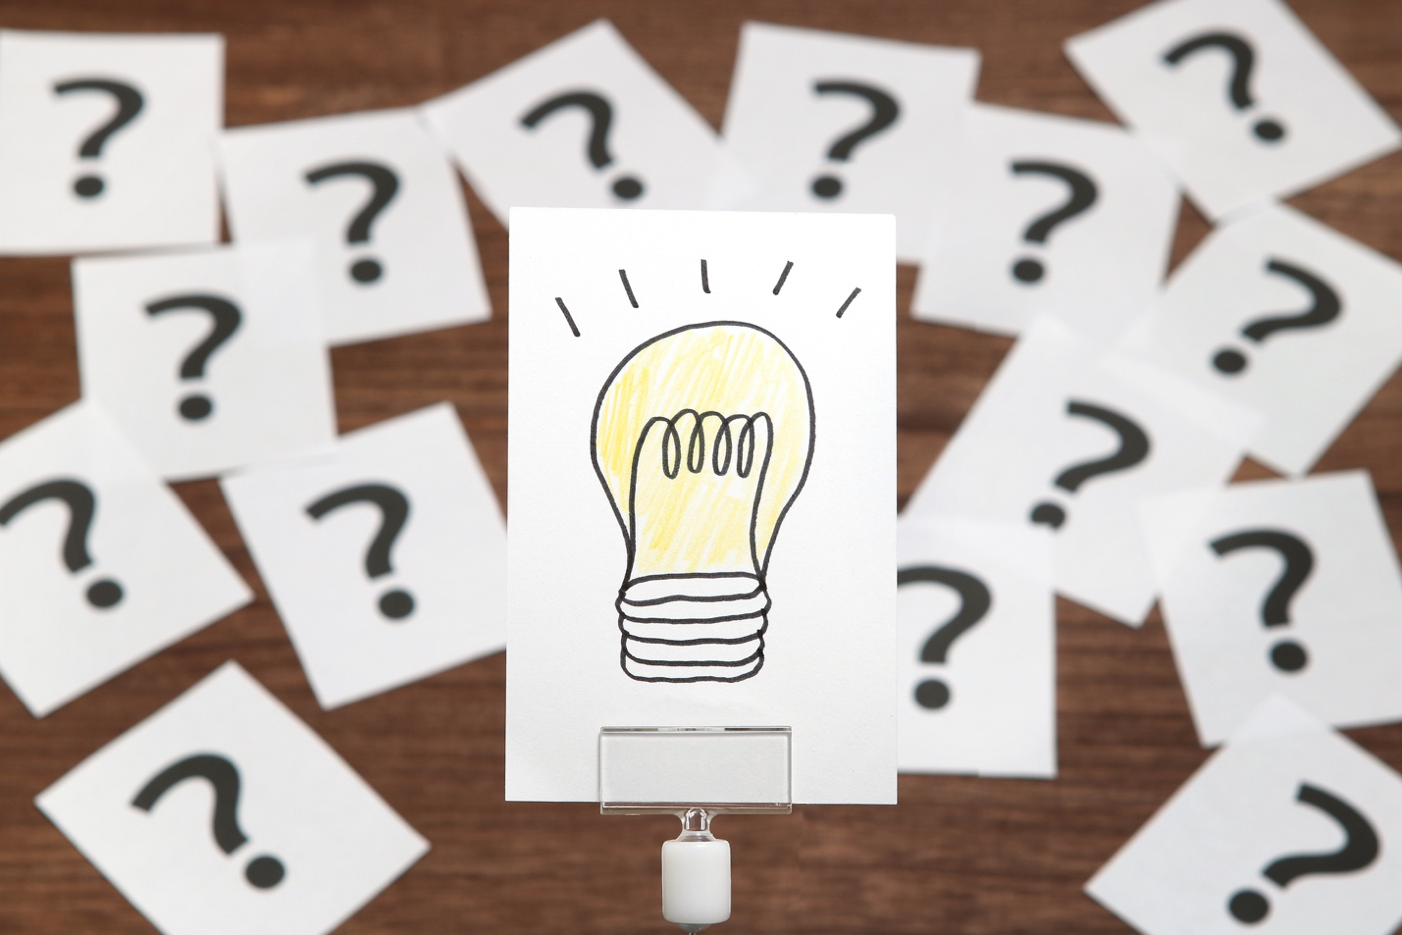 note card with a lightbulb, surrounded by note cards with question marks